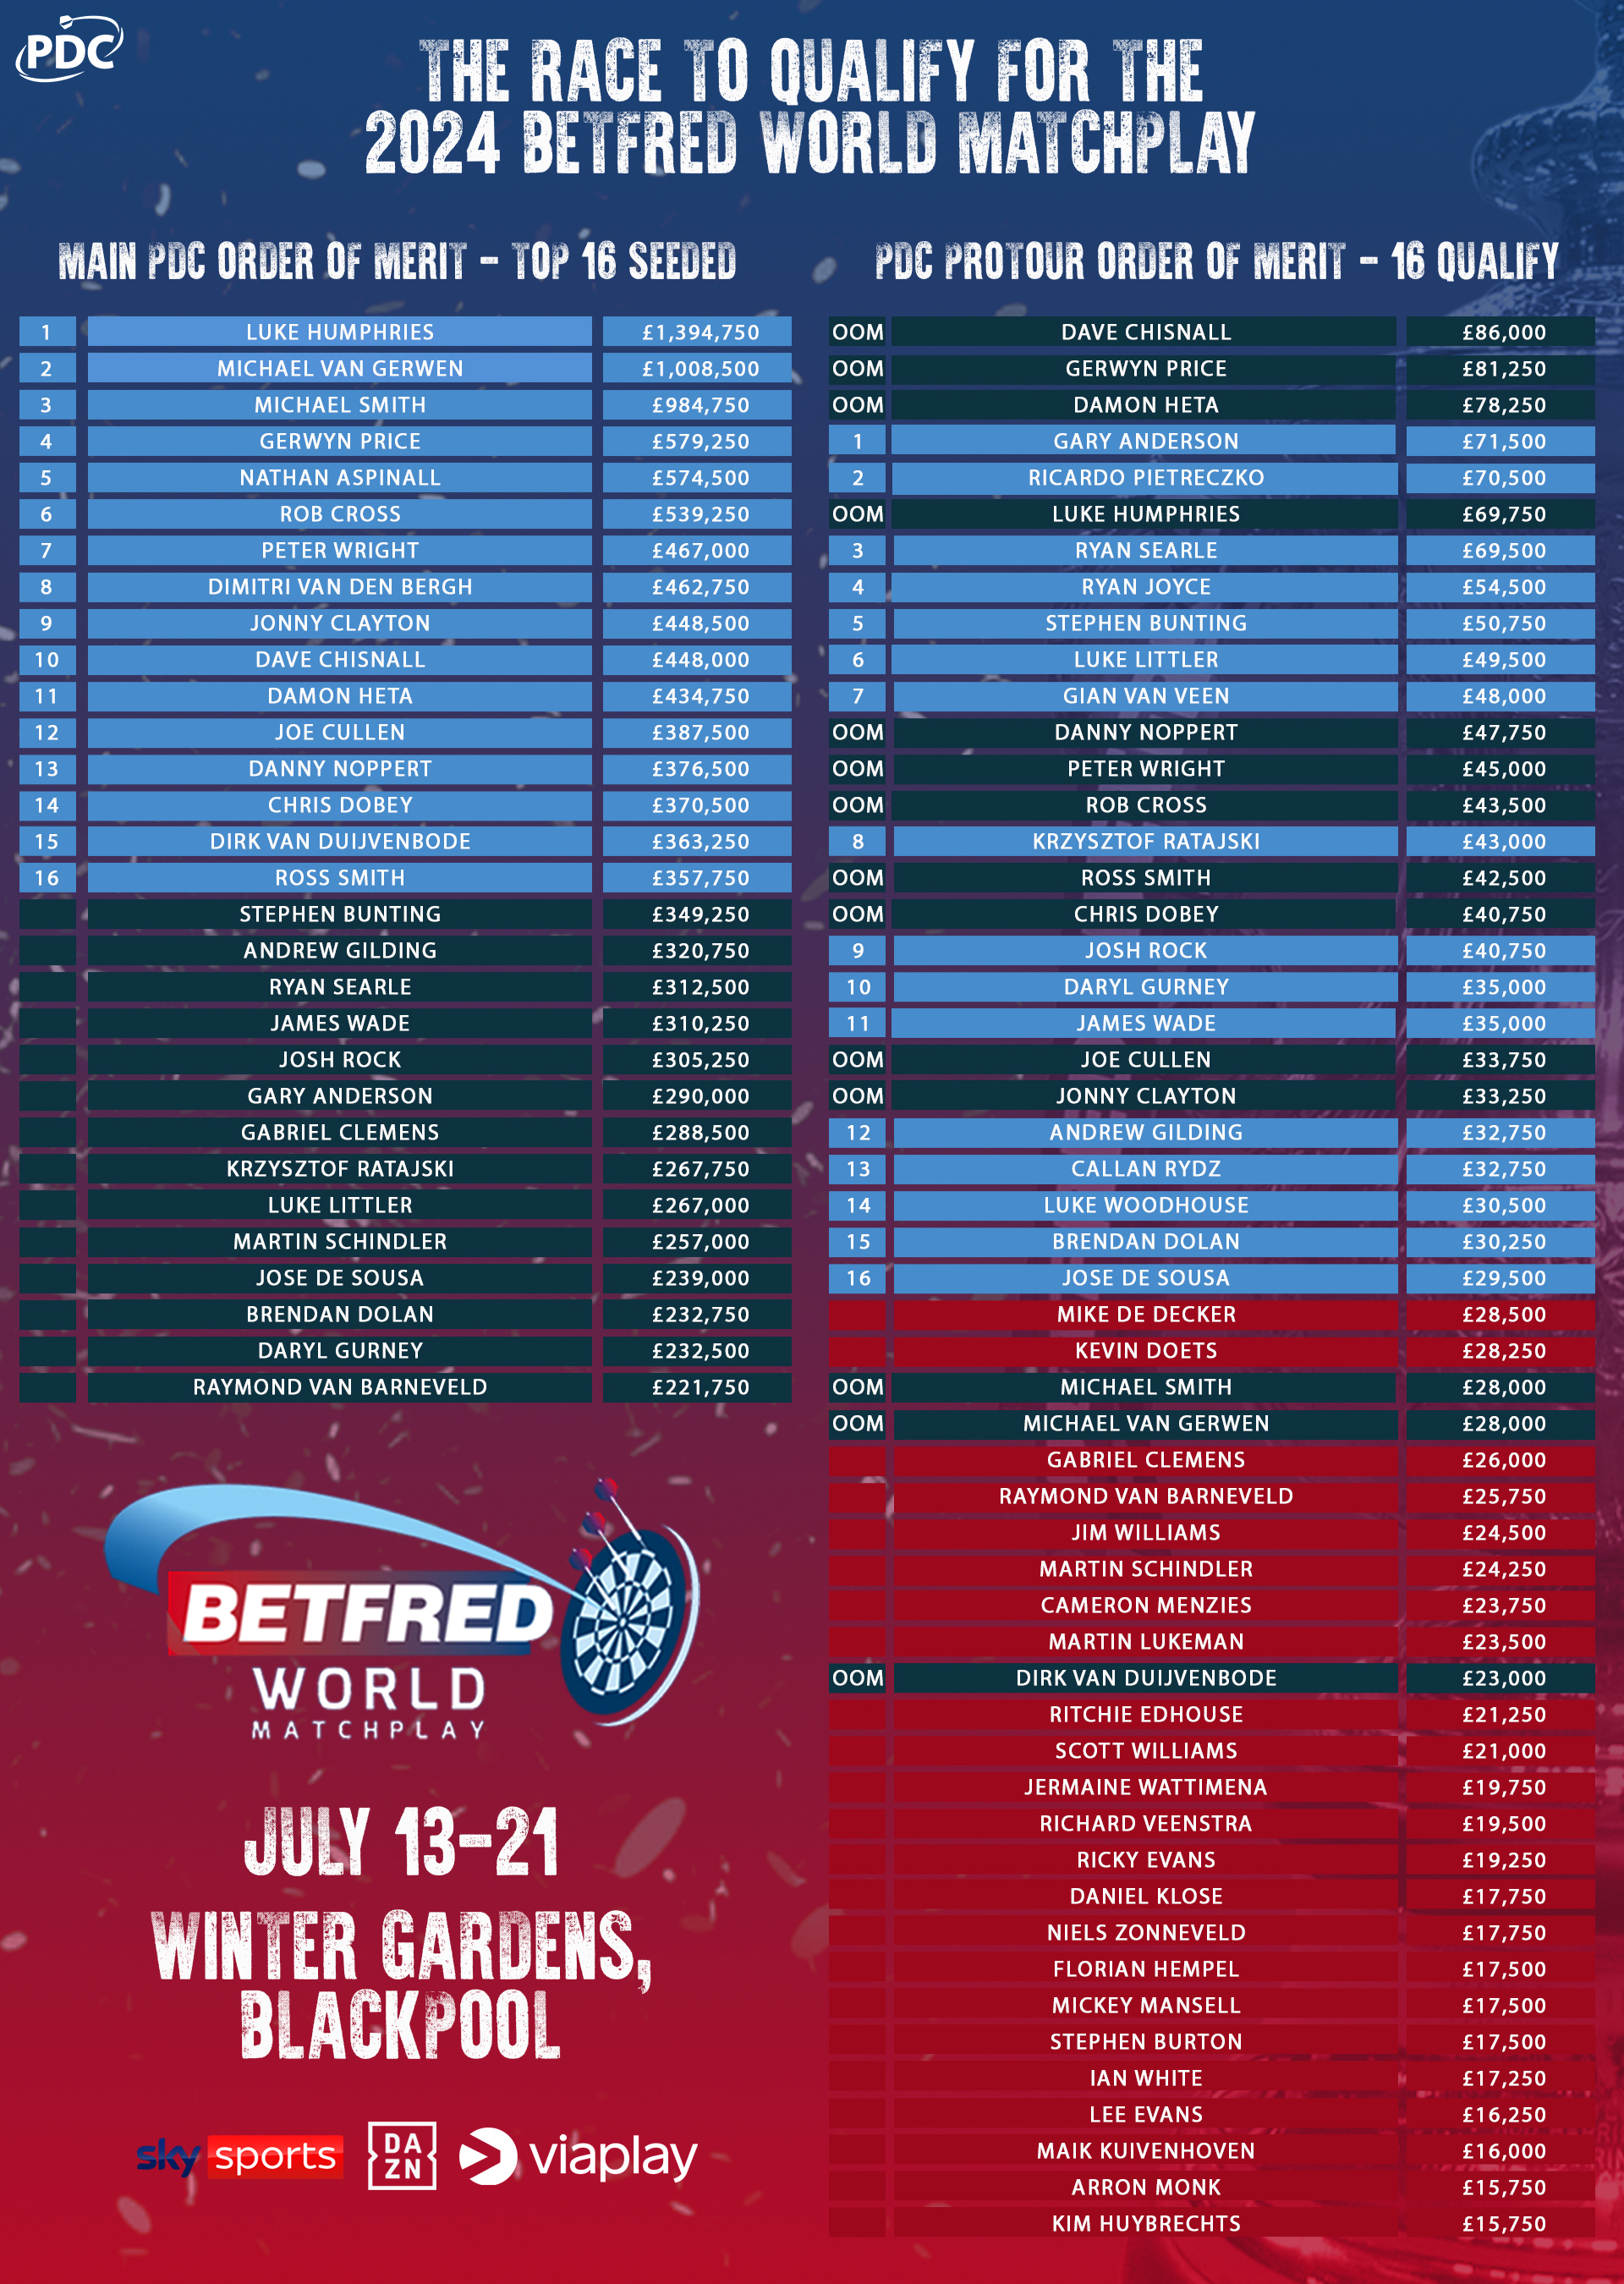 Race for Betfred World Matchplay qualification